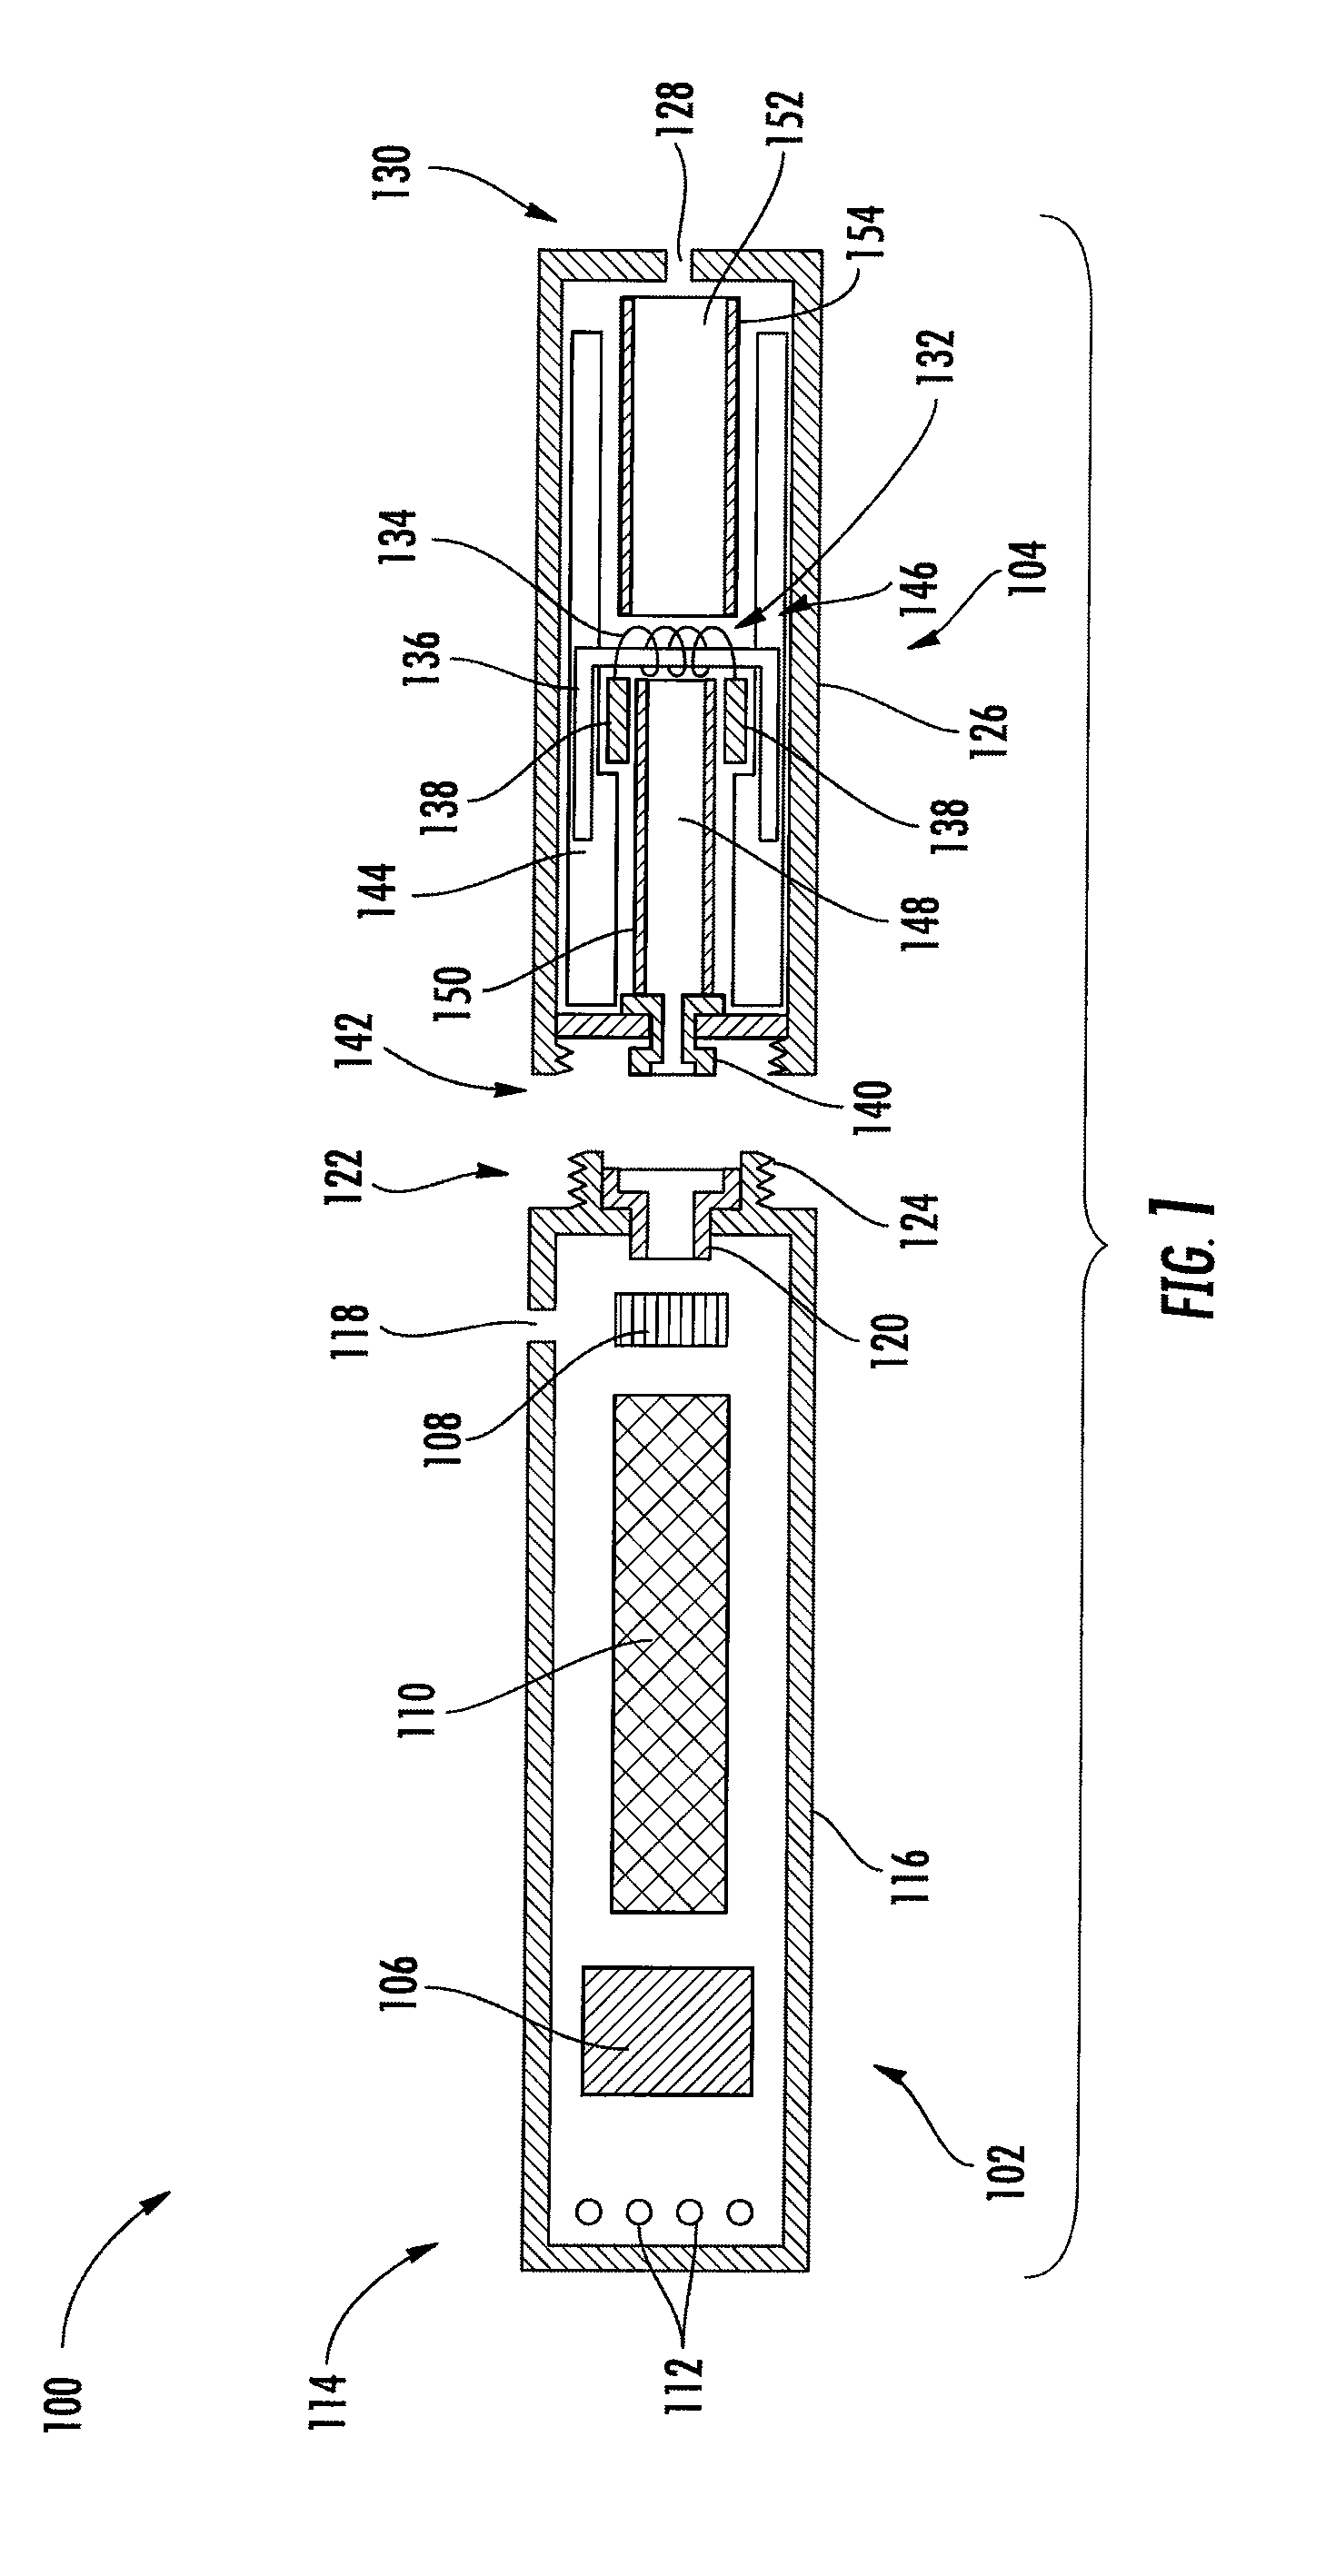 Aerosol Delivery Device and Related Method and Computer Program Product for Controlling an Aerosol Delivery Device Based on Input Characteristics